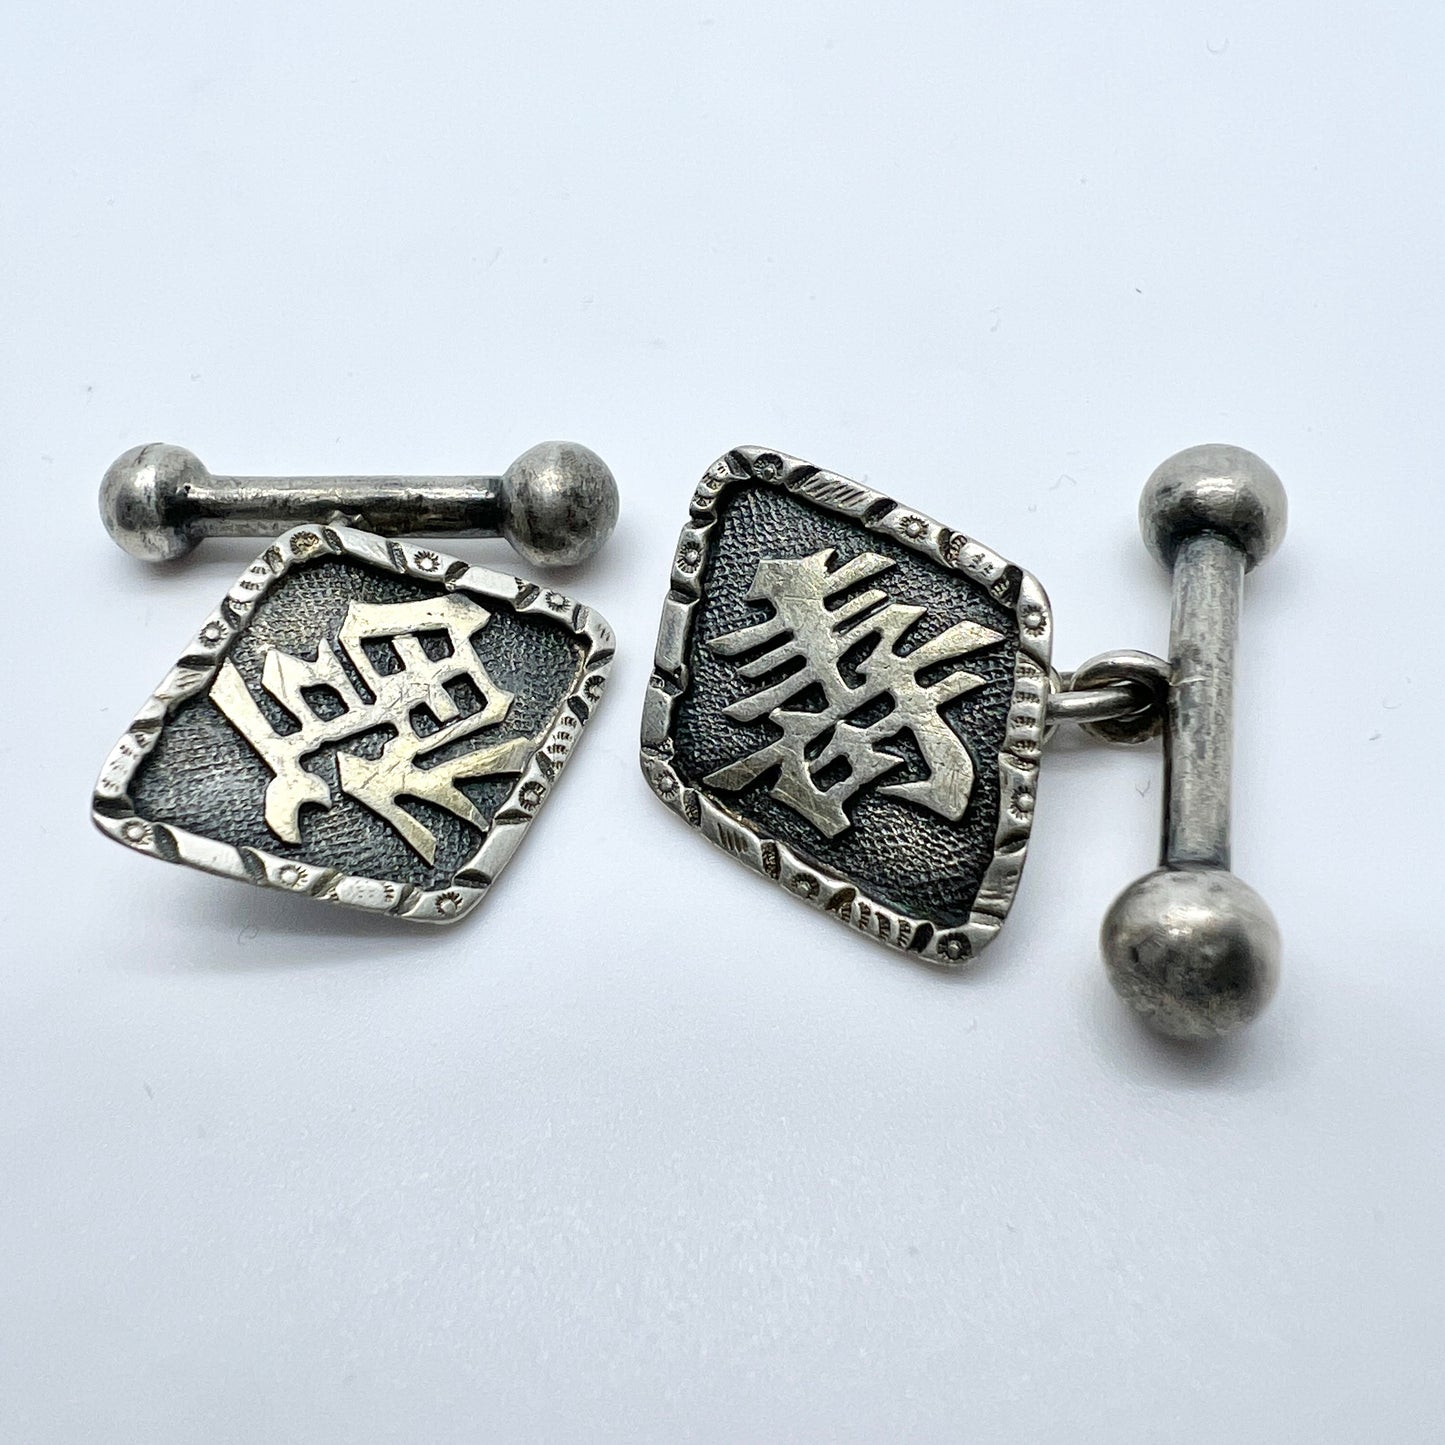 Chinese Export 1930s Solid Silver Cufflinks